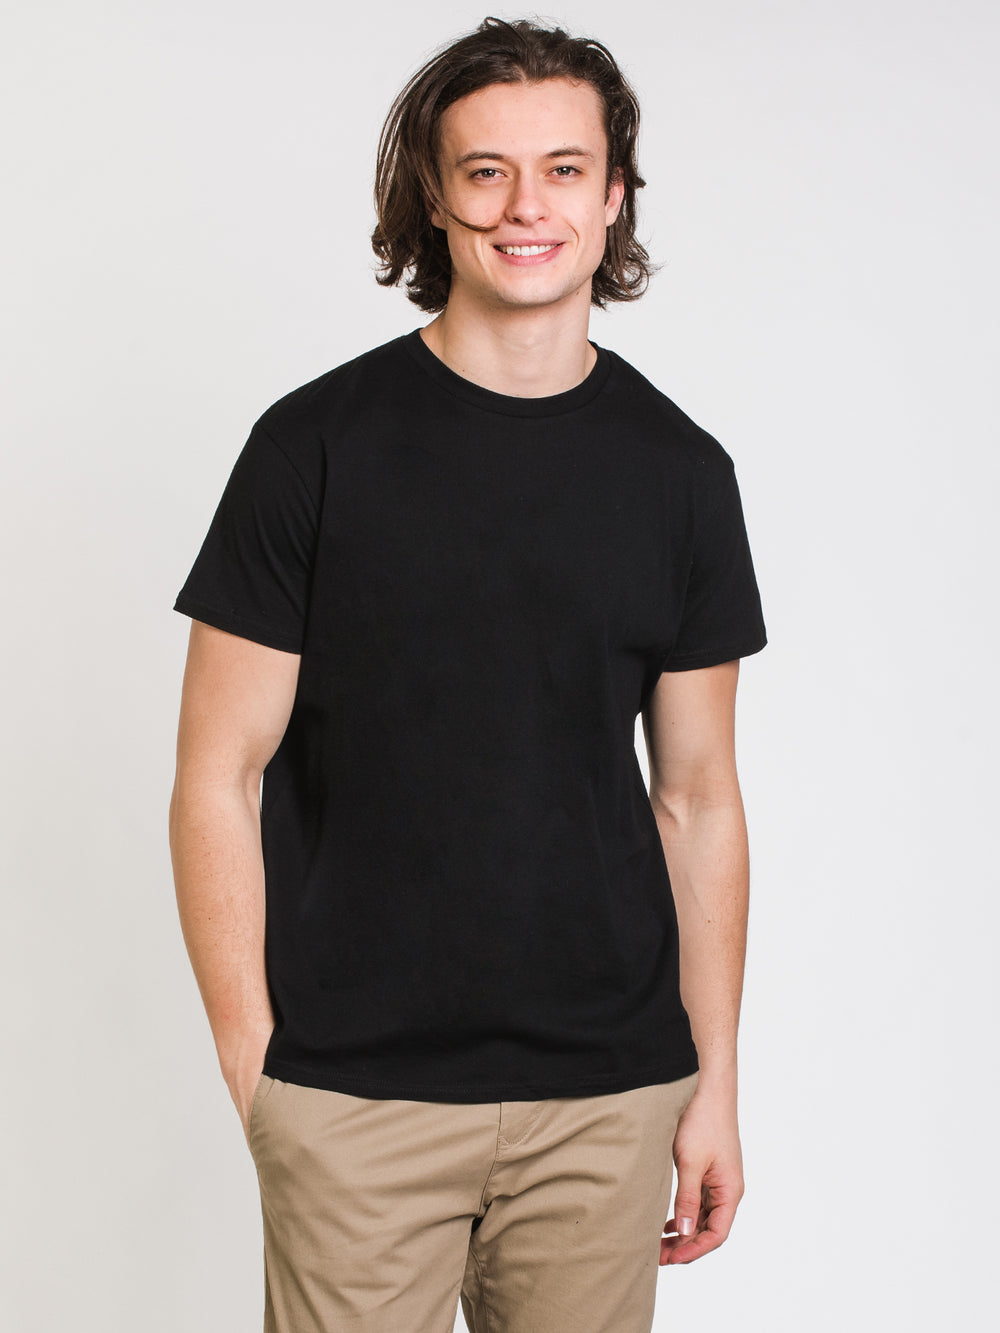 TENTREE UNISEX NO PLANET B TEE - CLEARANCE